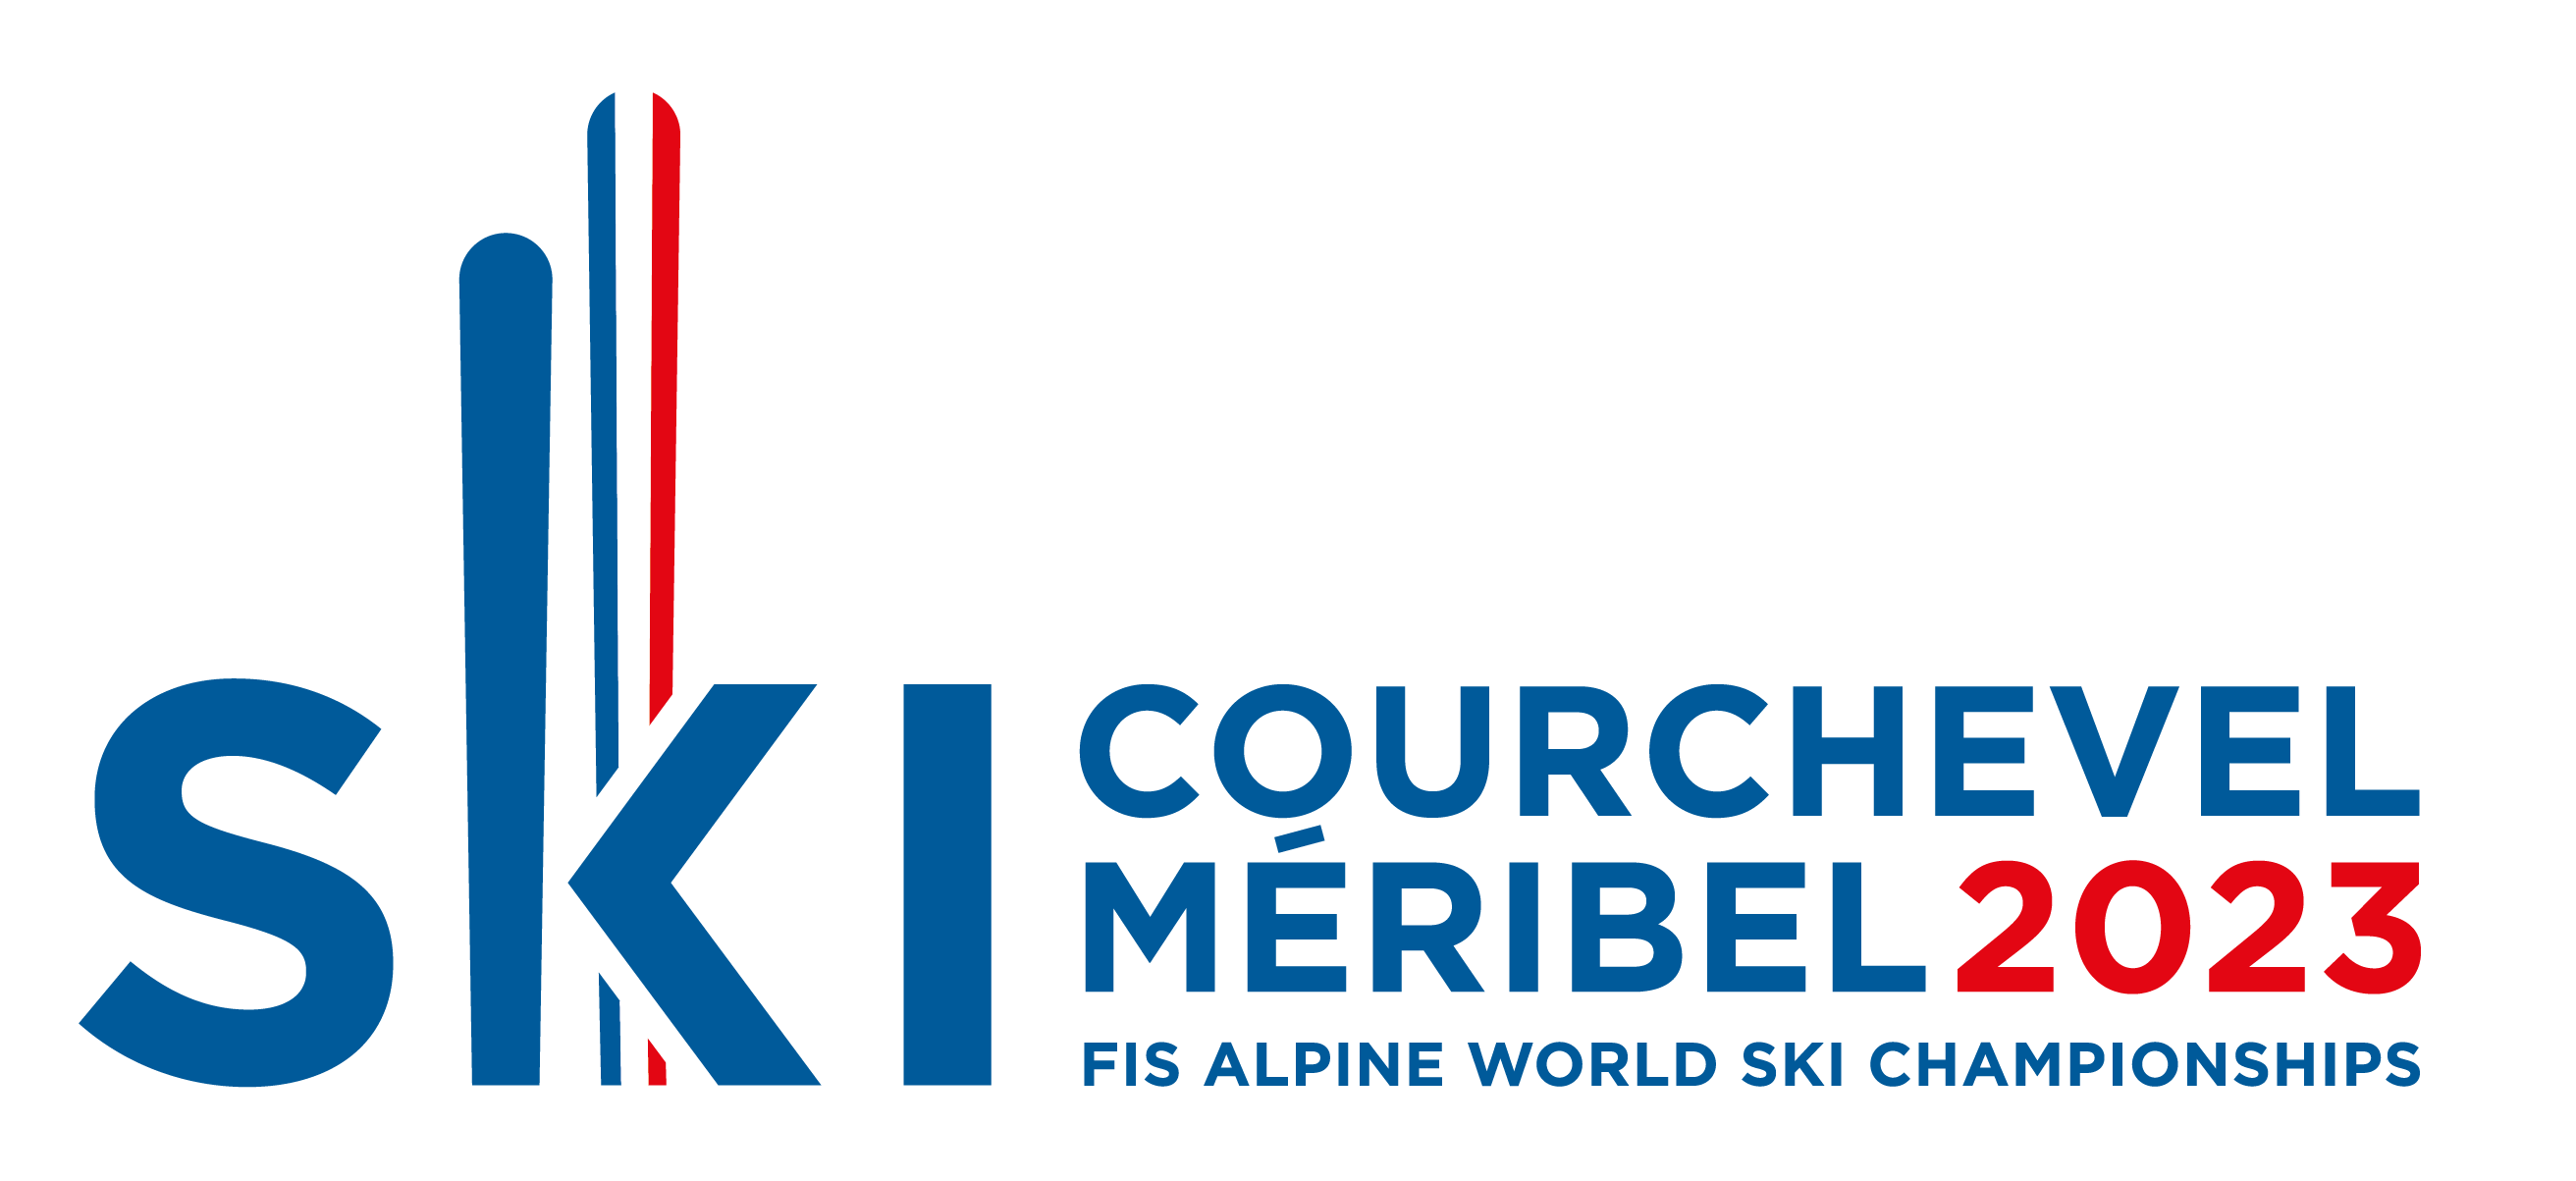 MIKAELA SHIFFRIN HIGHLIGHTS CONTINUED LIVE COVERAGE OF 2023 FIS ALPINE WORLD SKI CHAMPIONSHIPS PRESENTED BY STIFEL ACROSS PEACOCK, NBC AND SKIANDSNOWBOARD.LIVE THIS WEEK